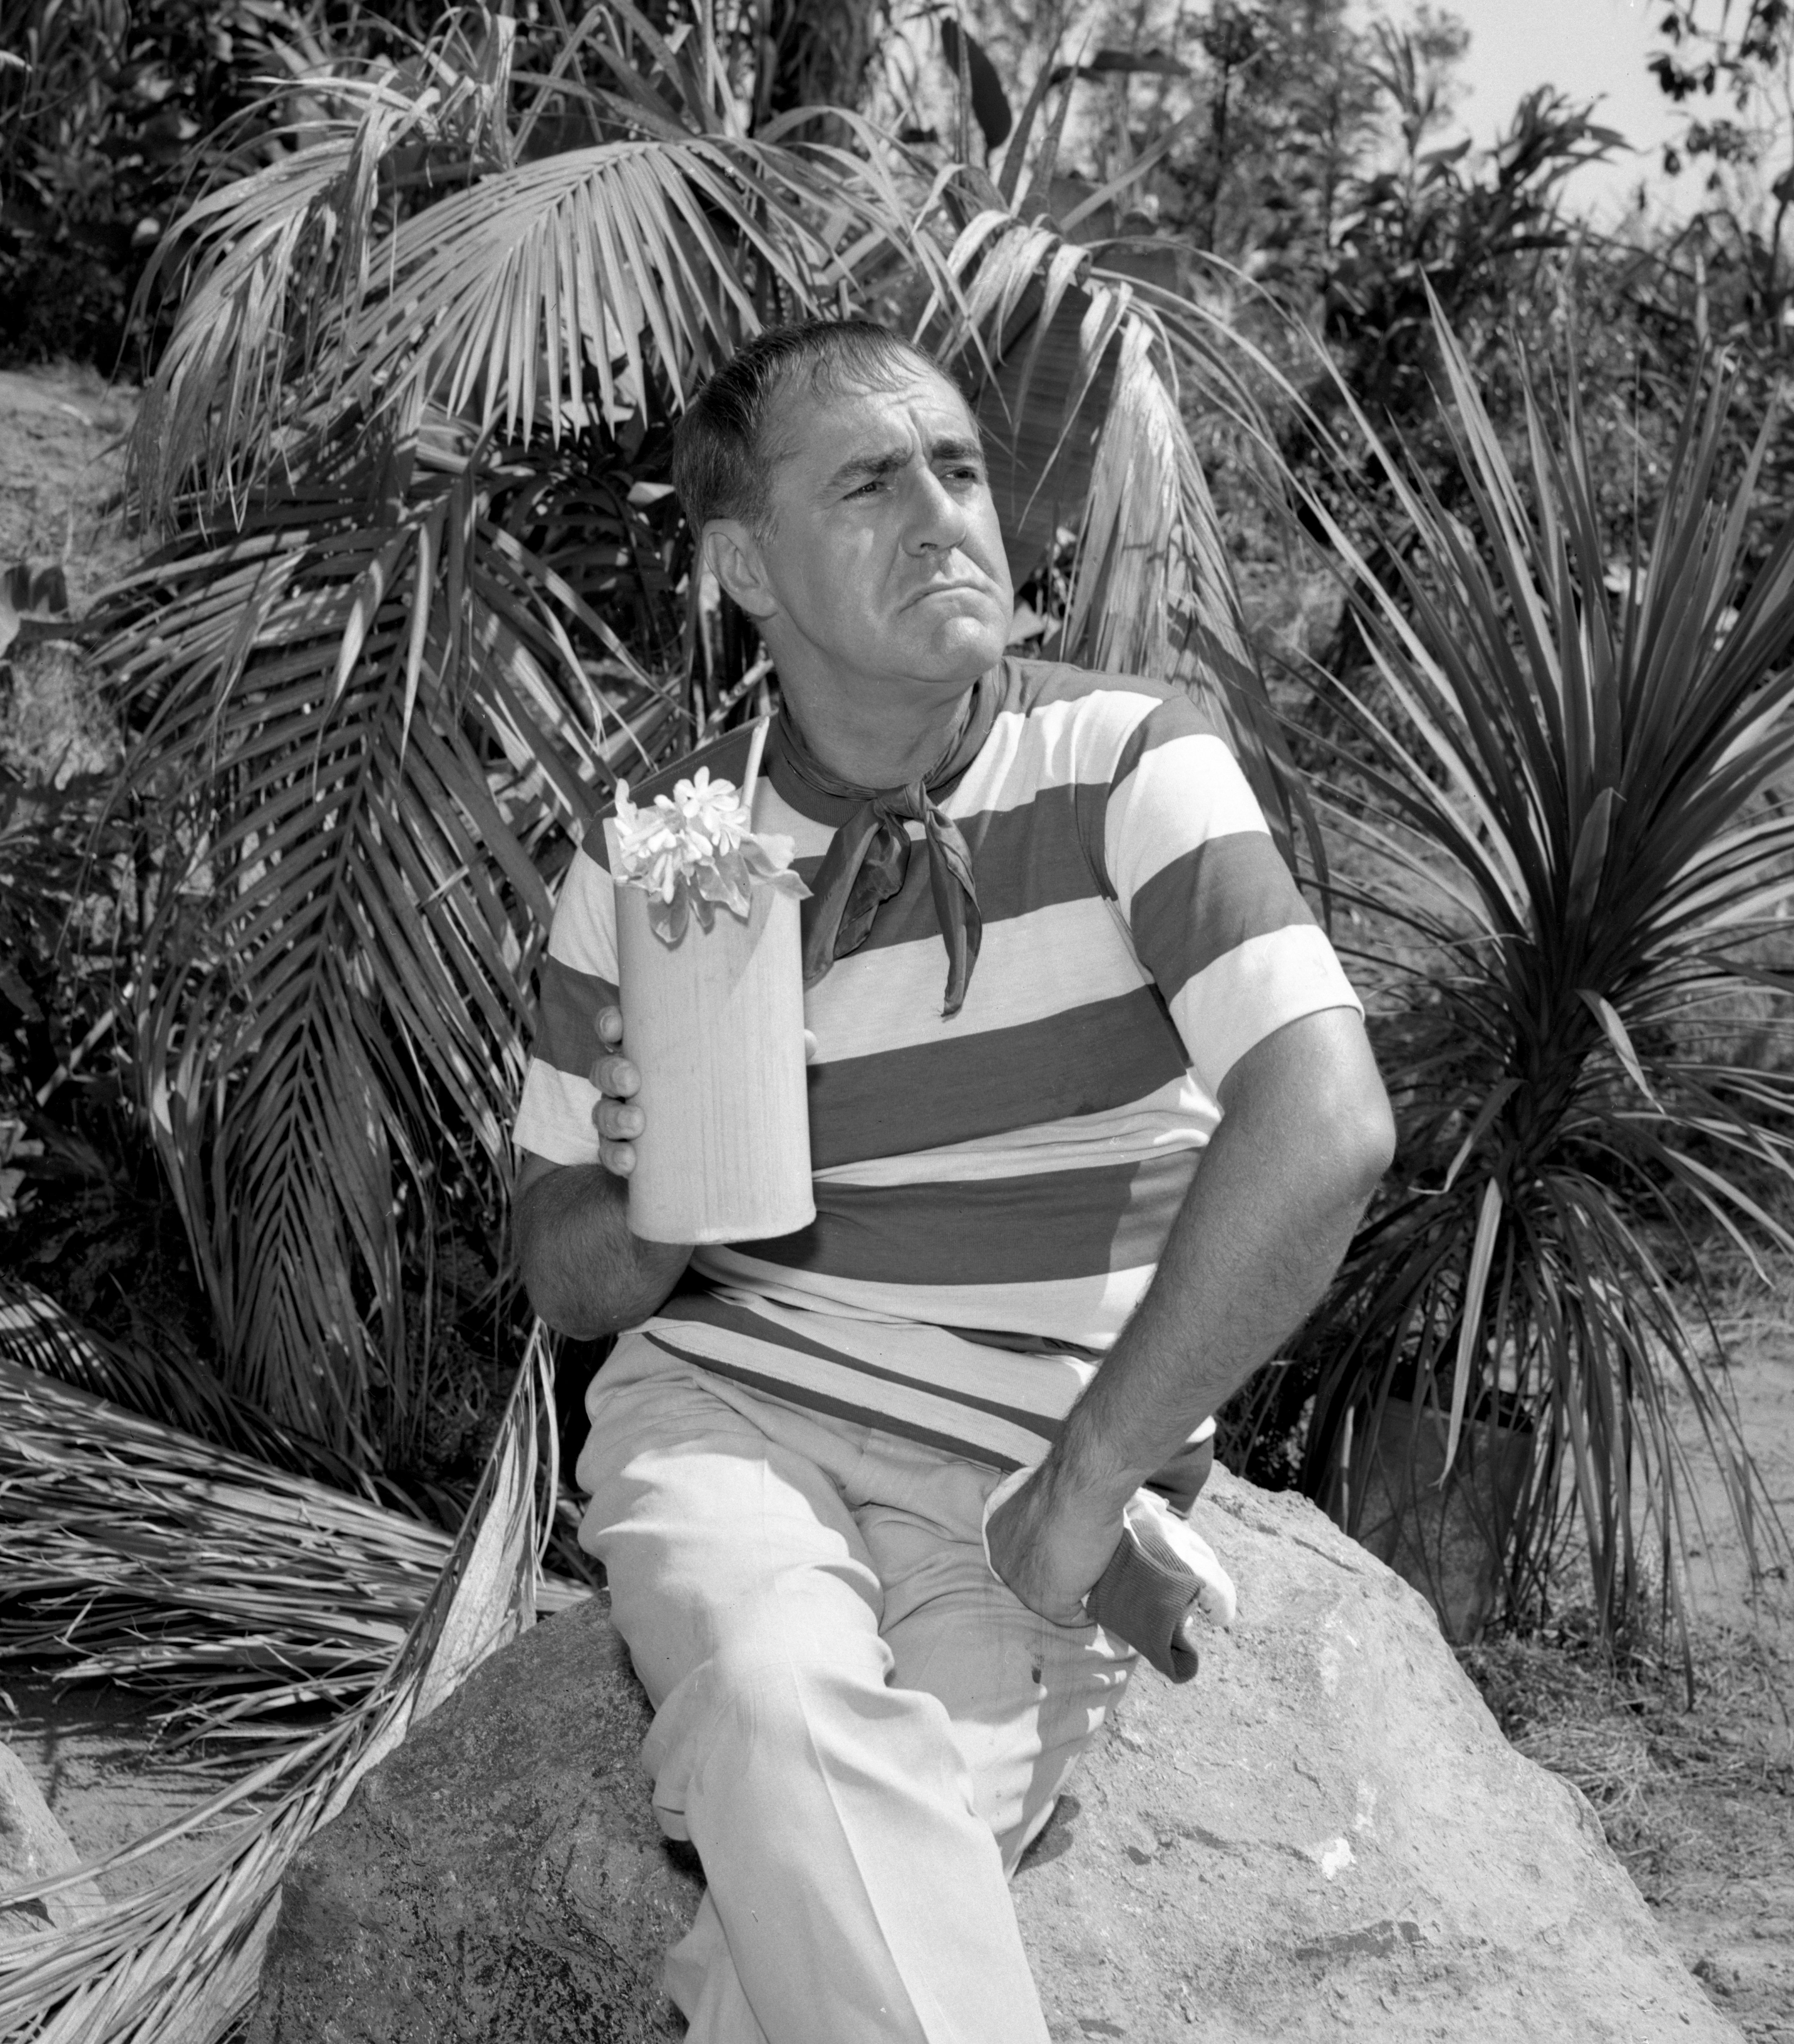 Jim Backus as Thurston Howell III during the "Home Sweet Hut" episode of "Gilligan's Island" on March 3, 1964. | Source: Getty Images